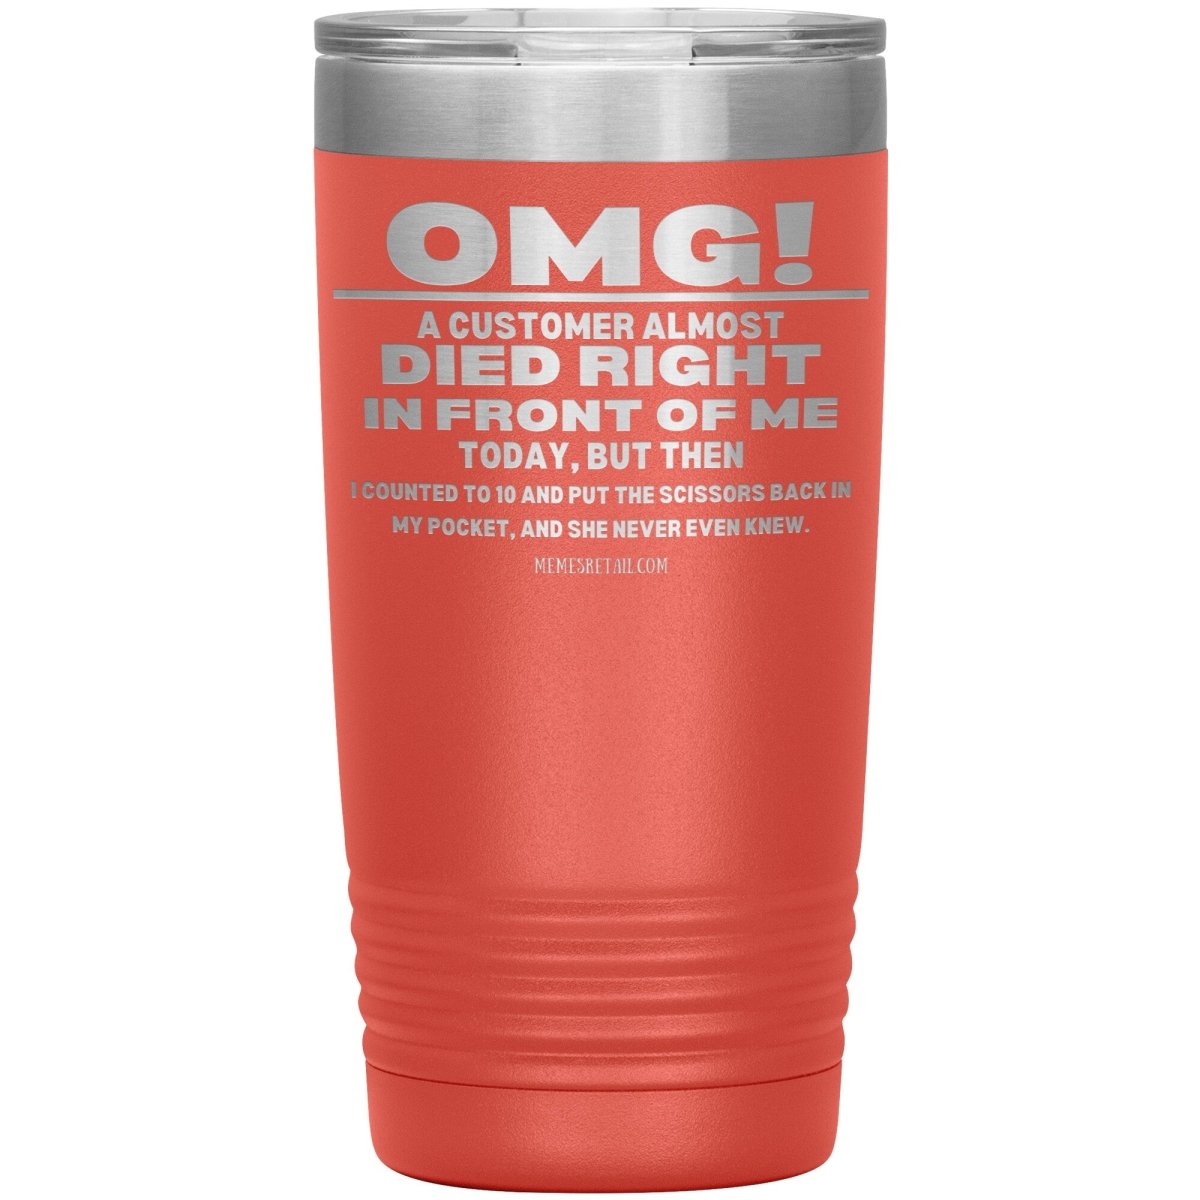 OMG! A Customer Almost Died Right In Front Of Me Tumbler, 20oz Insulated Tumbler / Coral - MemesRetail.com